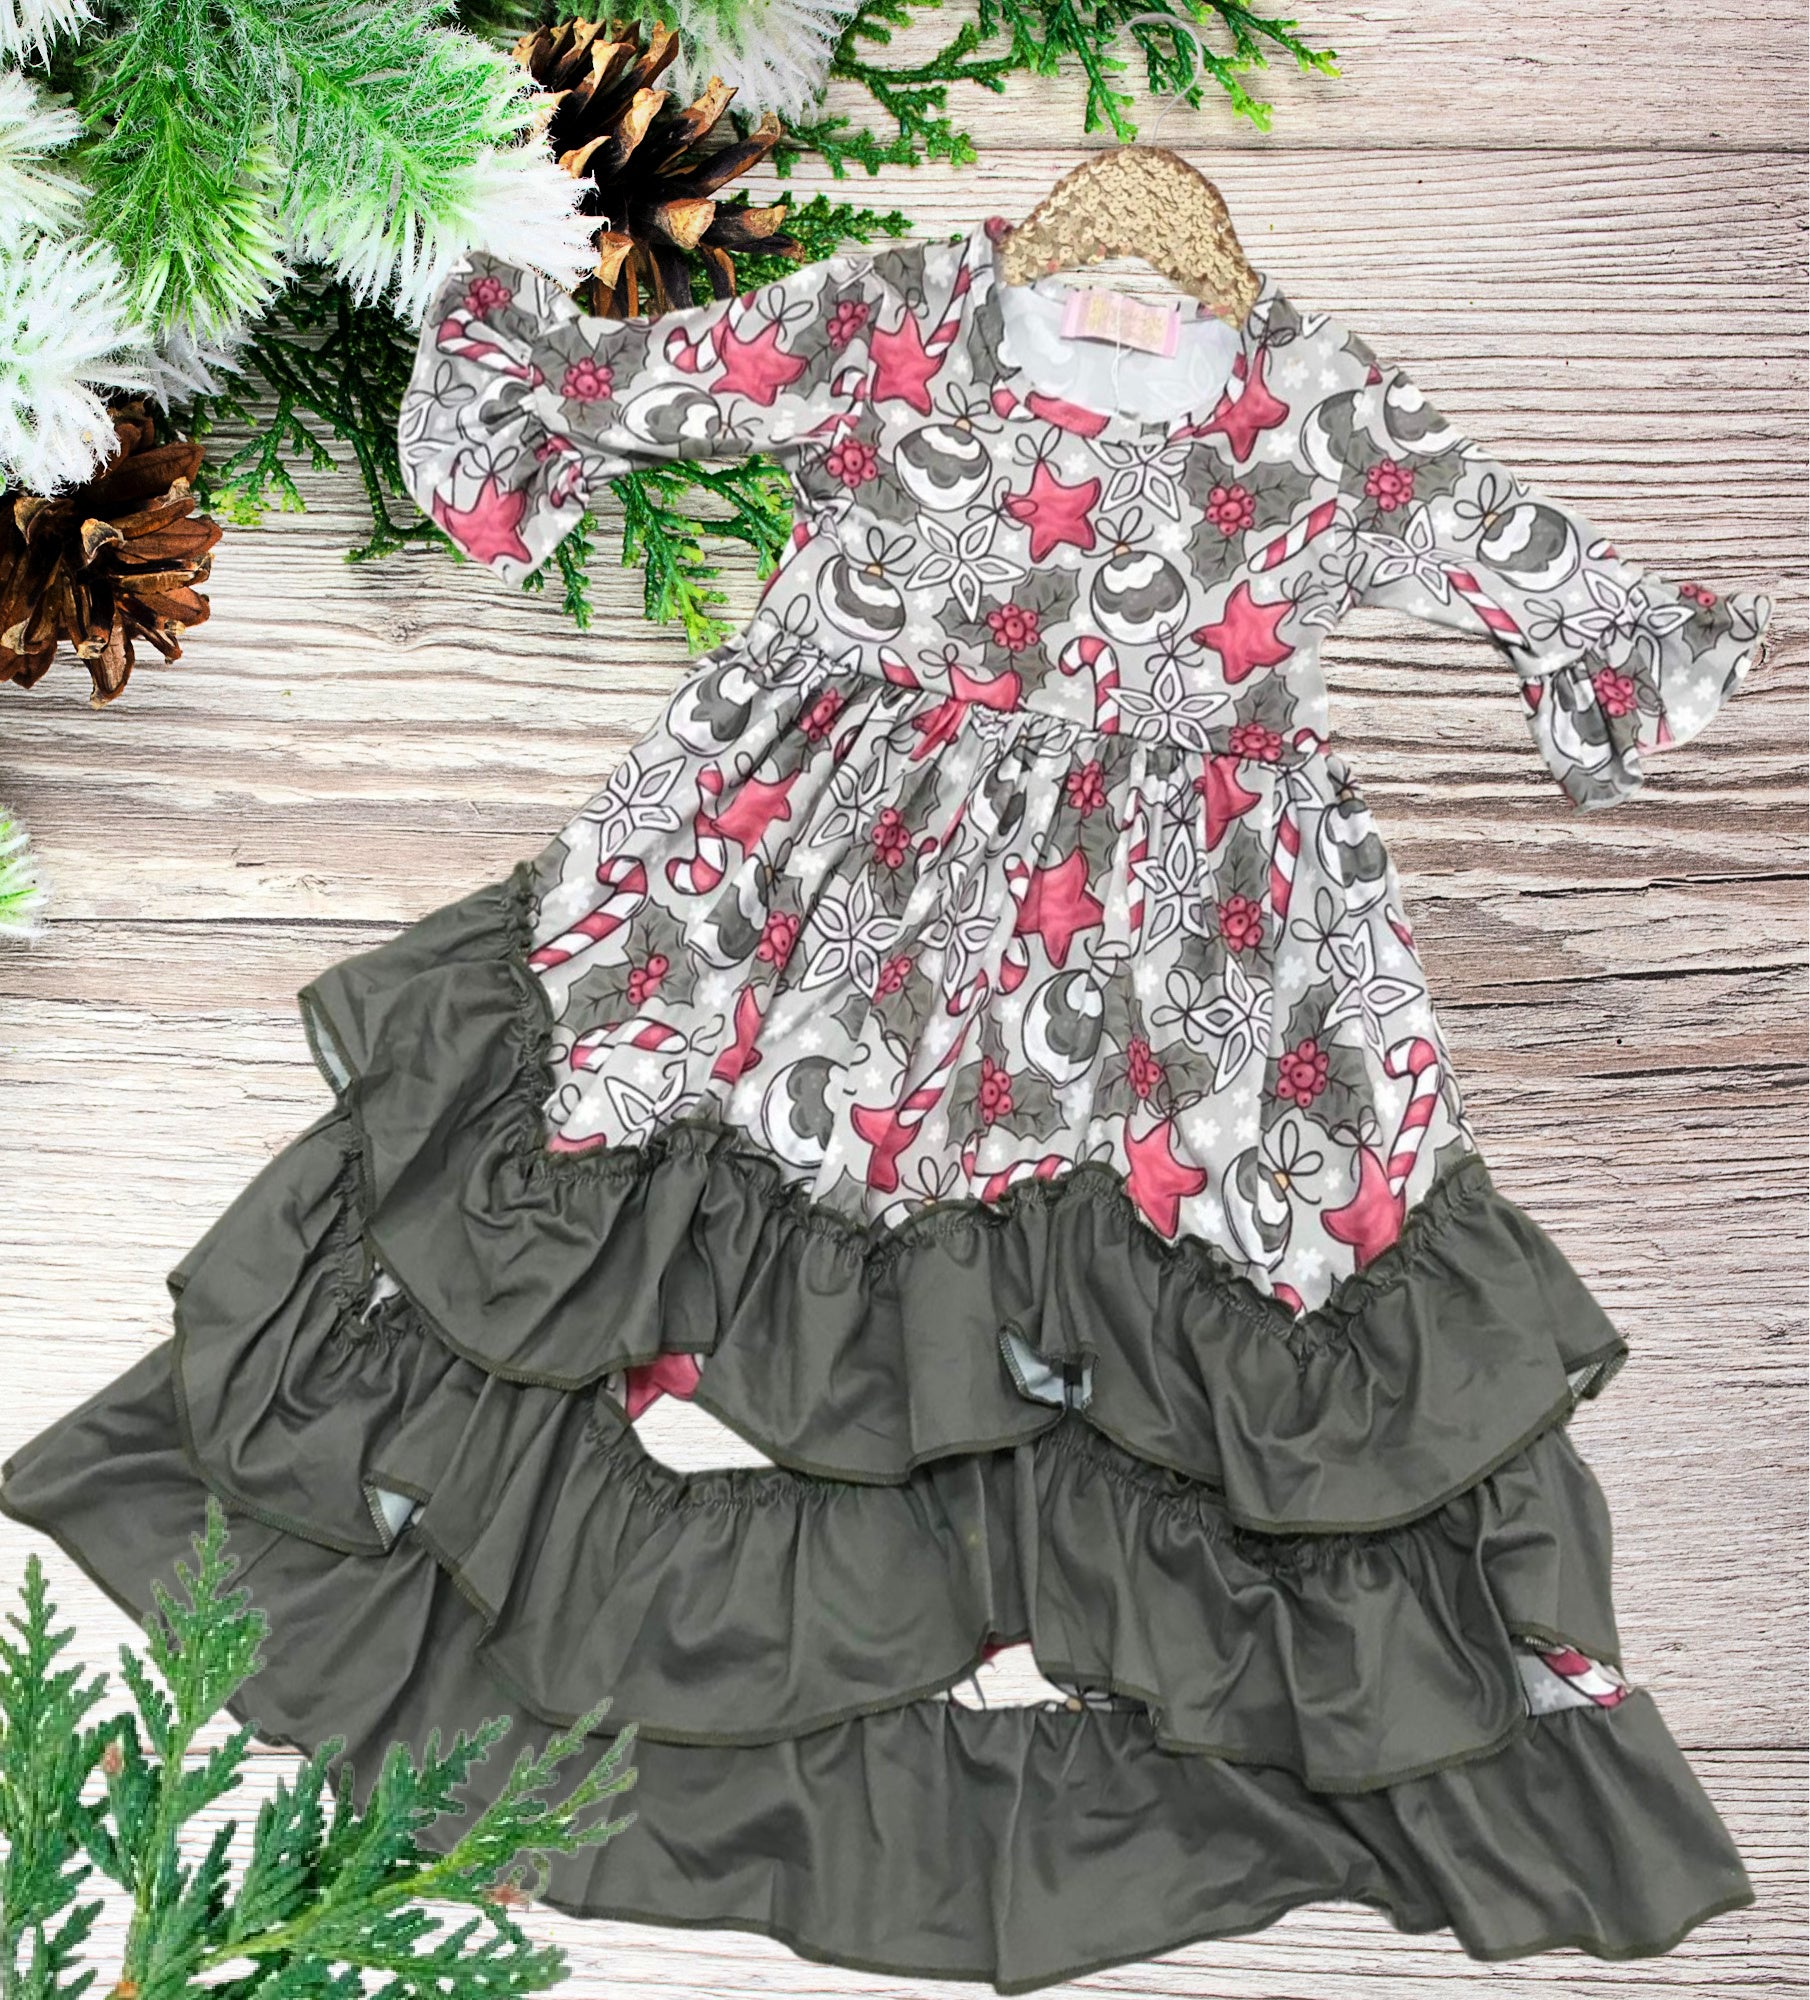 Girls Long Ruffle Holiday/Christmas Dresses - Green With Red Star Ornaments and holly and candy canes